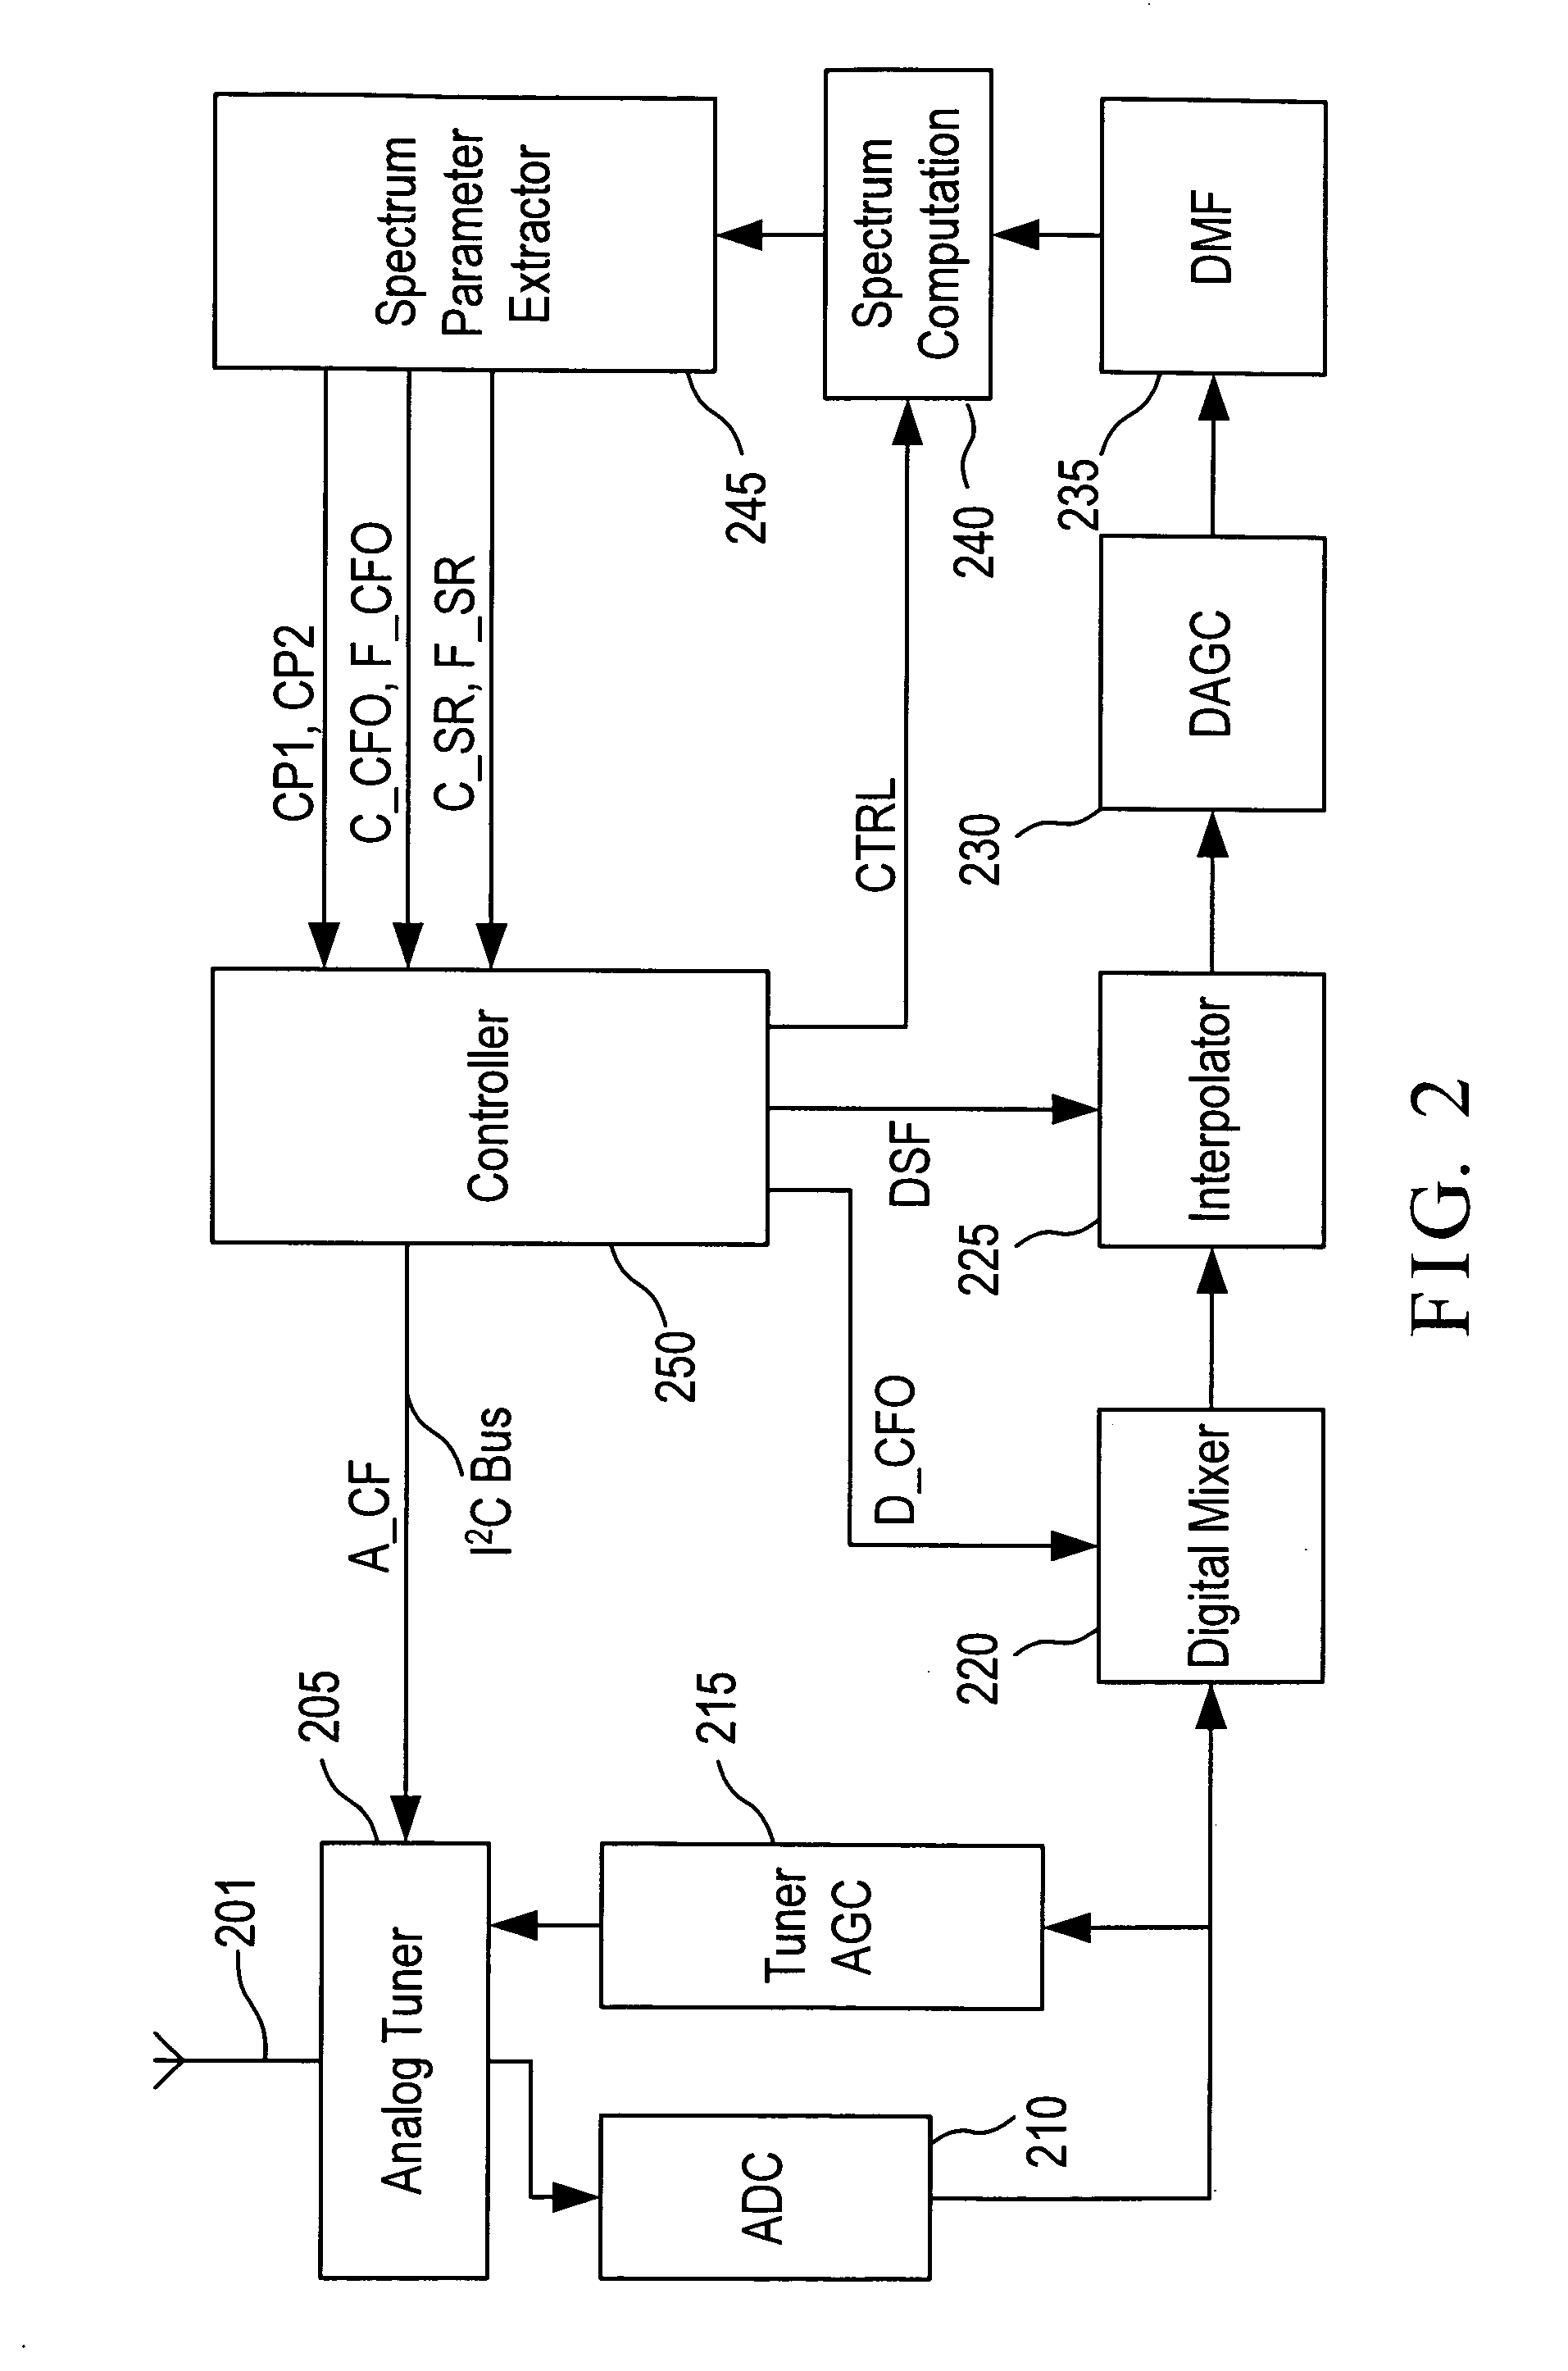 Blind scan system and method in a DVB-S system